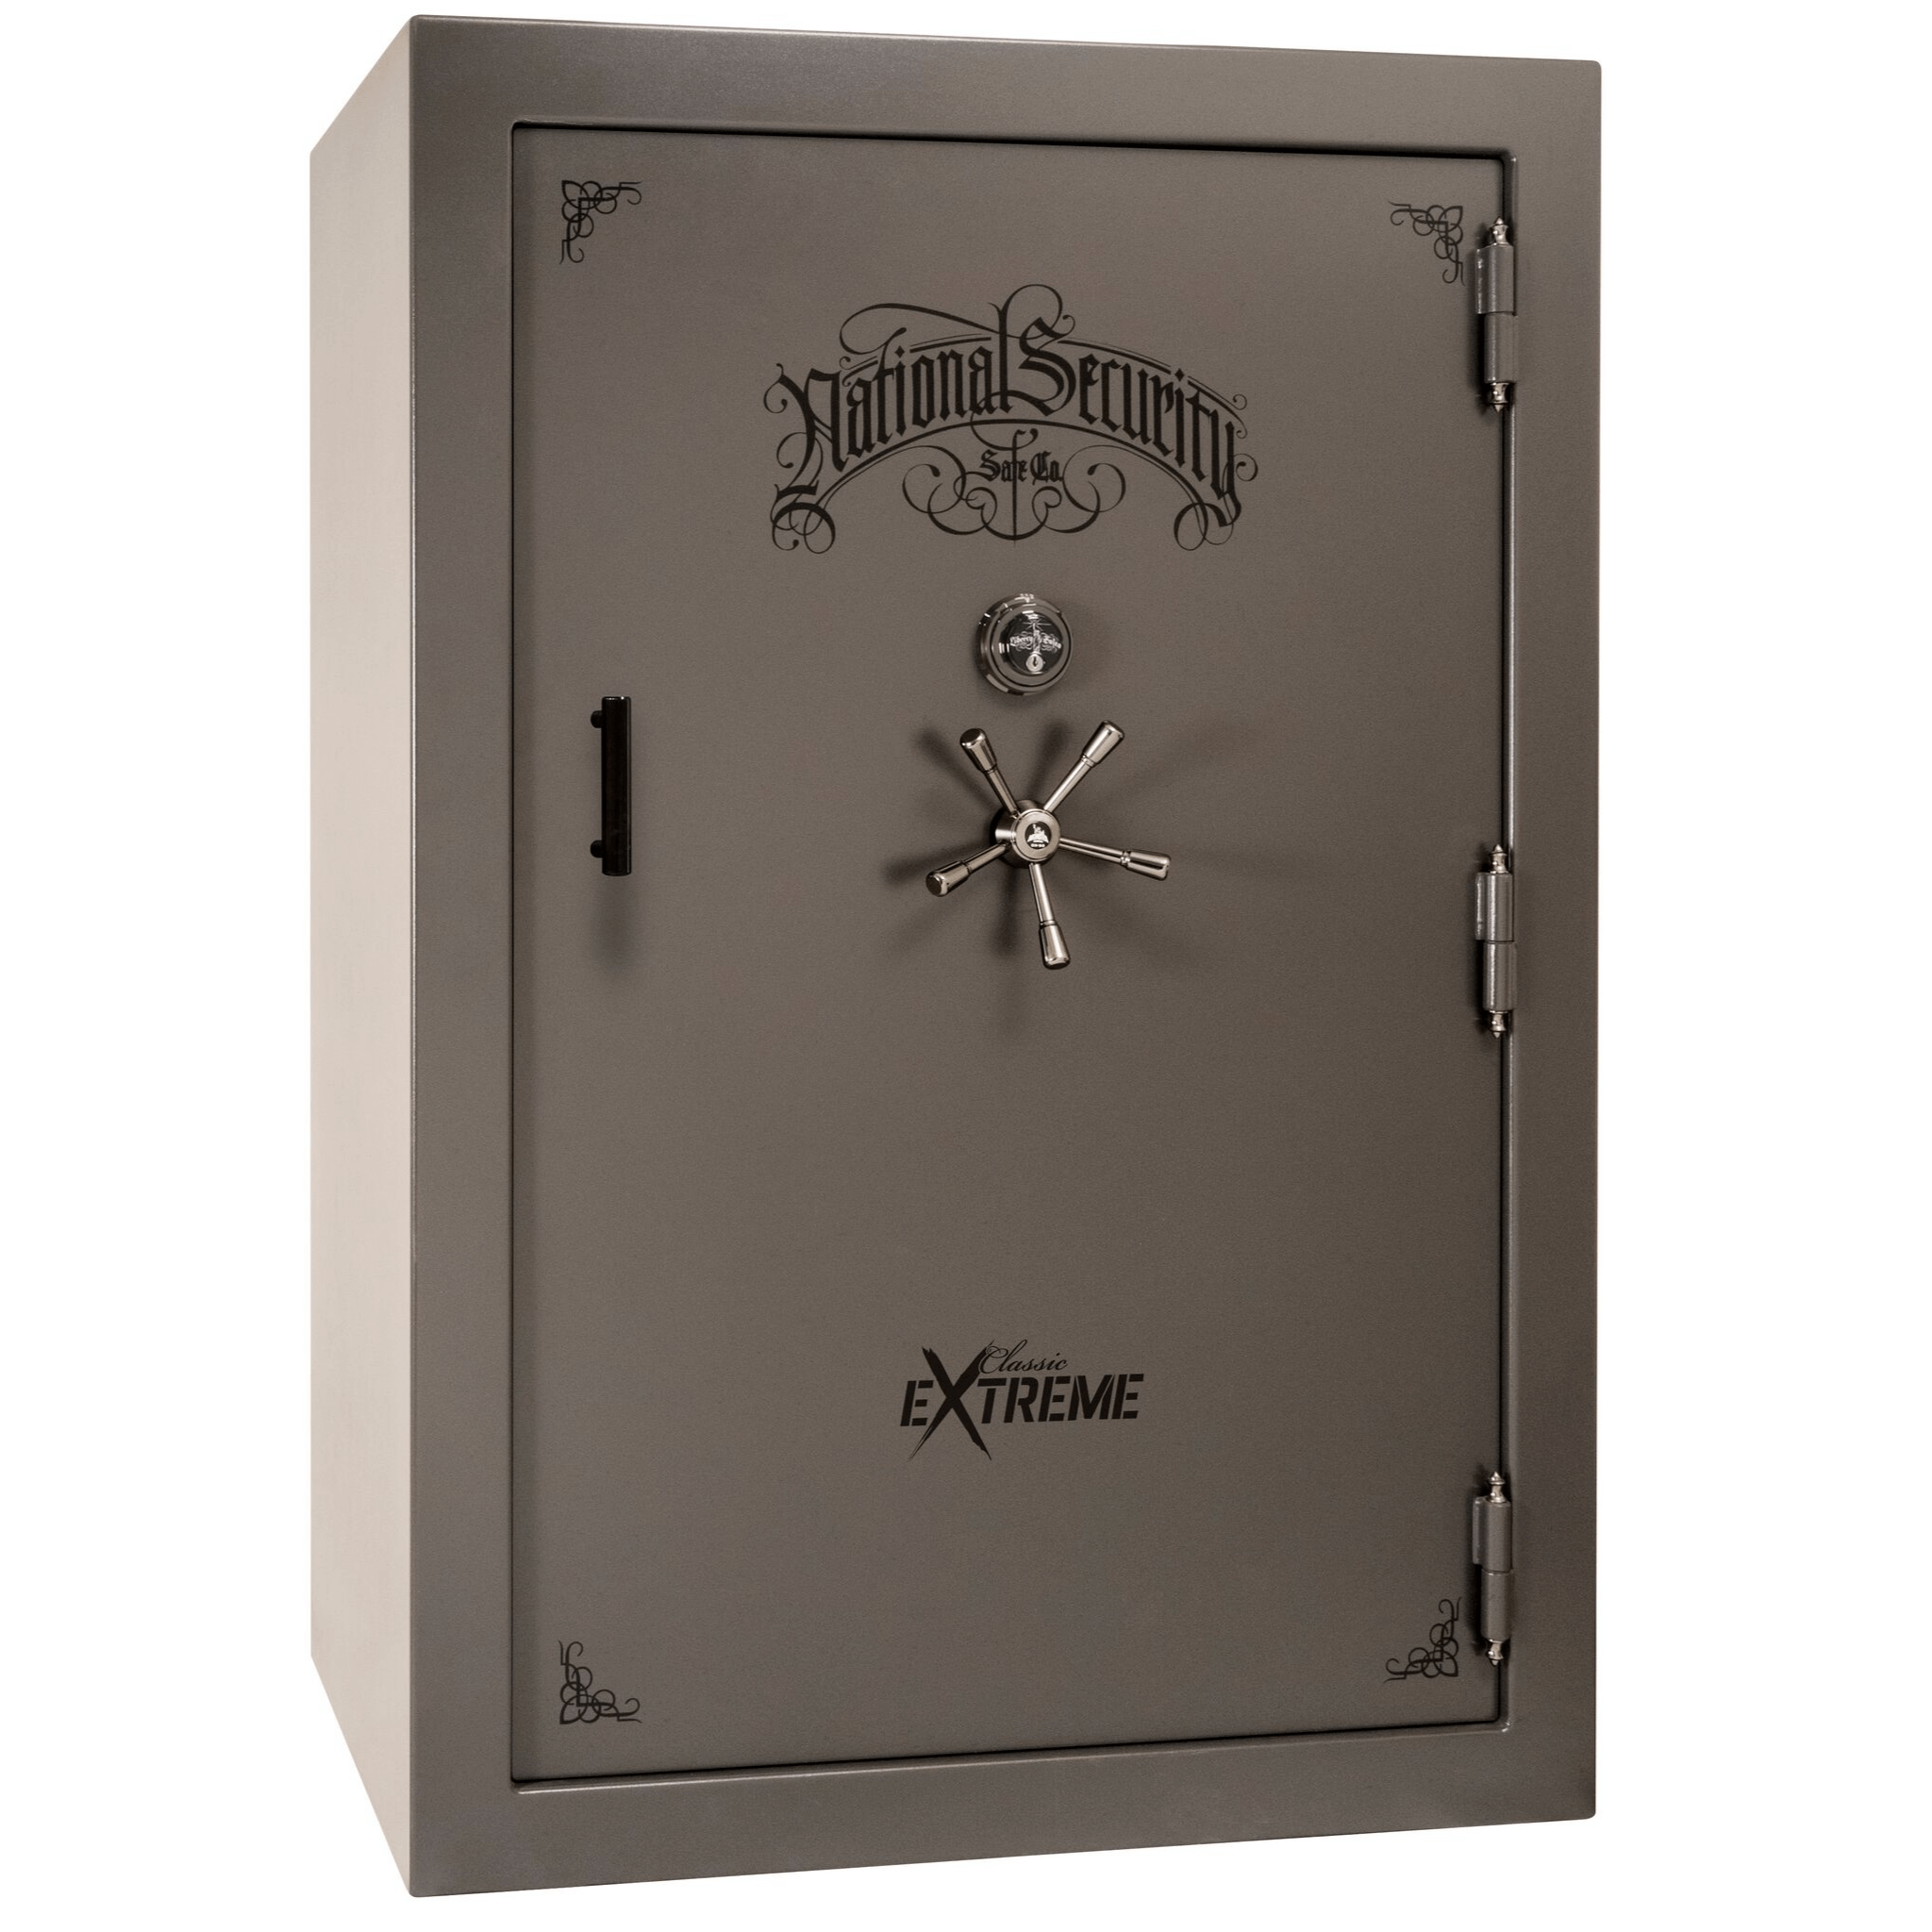 Liberty National Classic Select 60 Extreme Gun Safe with Mechanical Lock, photo 21